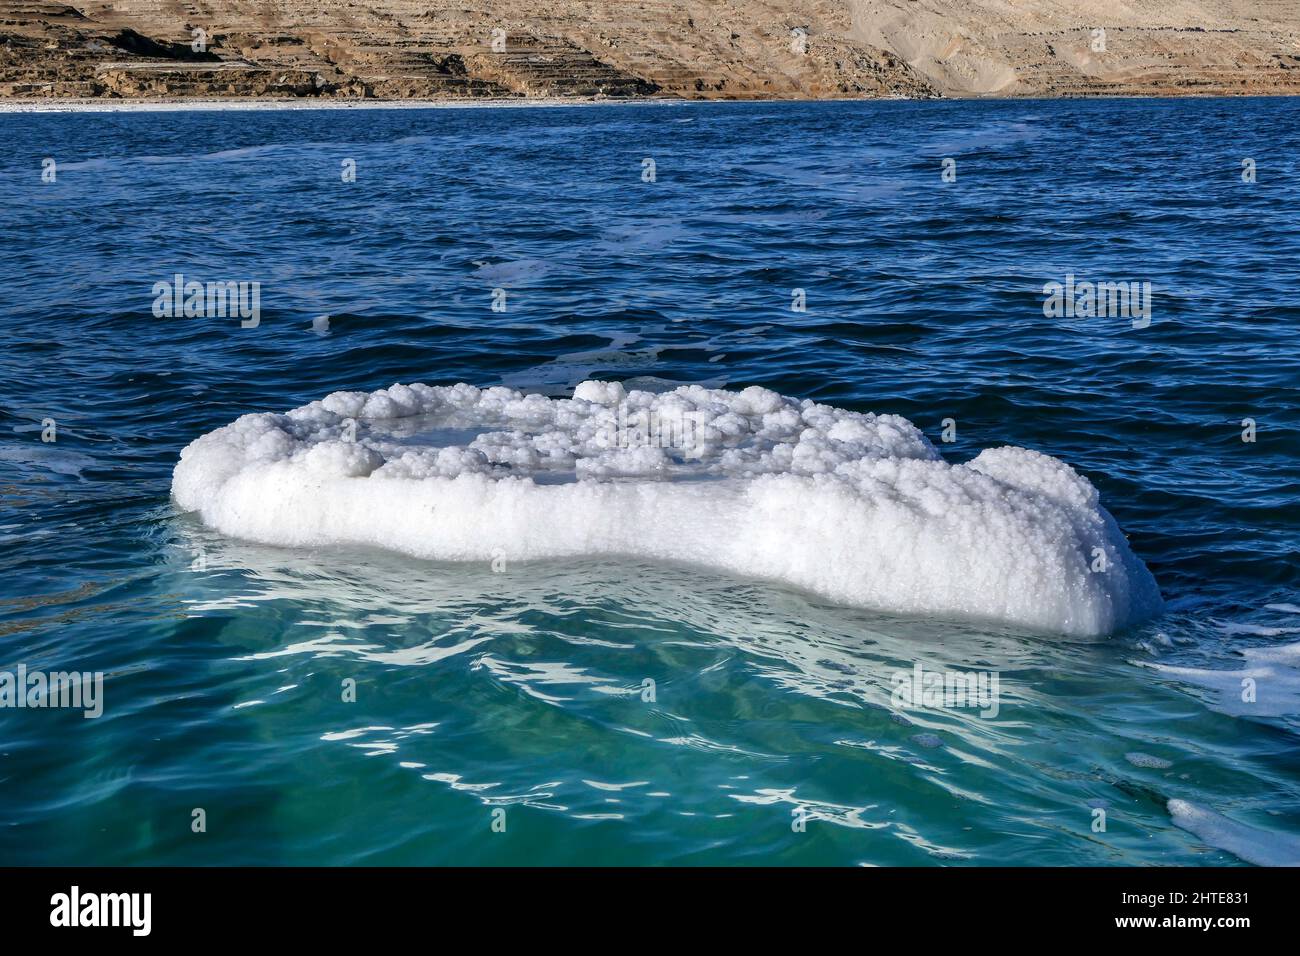 View of the salt formations protruding from the waters of the Dead Sea. Stock Photo